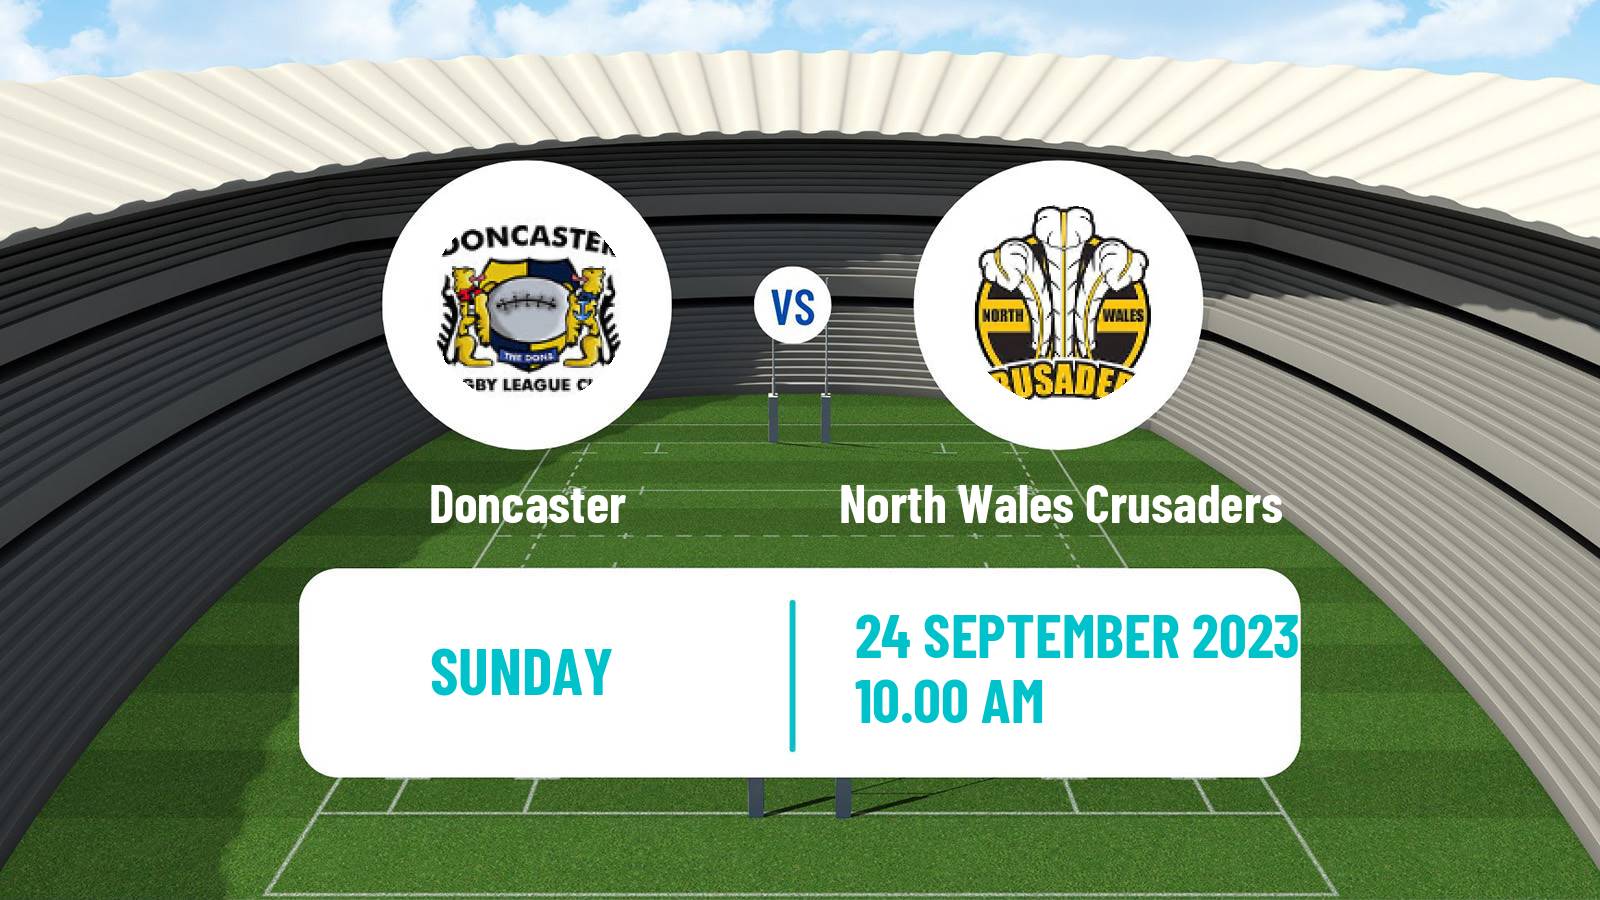 Rugby league English League 1 Rugby League Doncaster - North Wales Crusaders